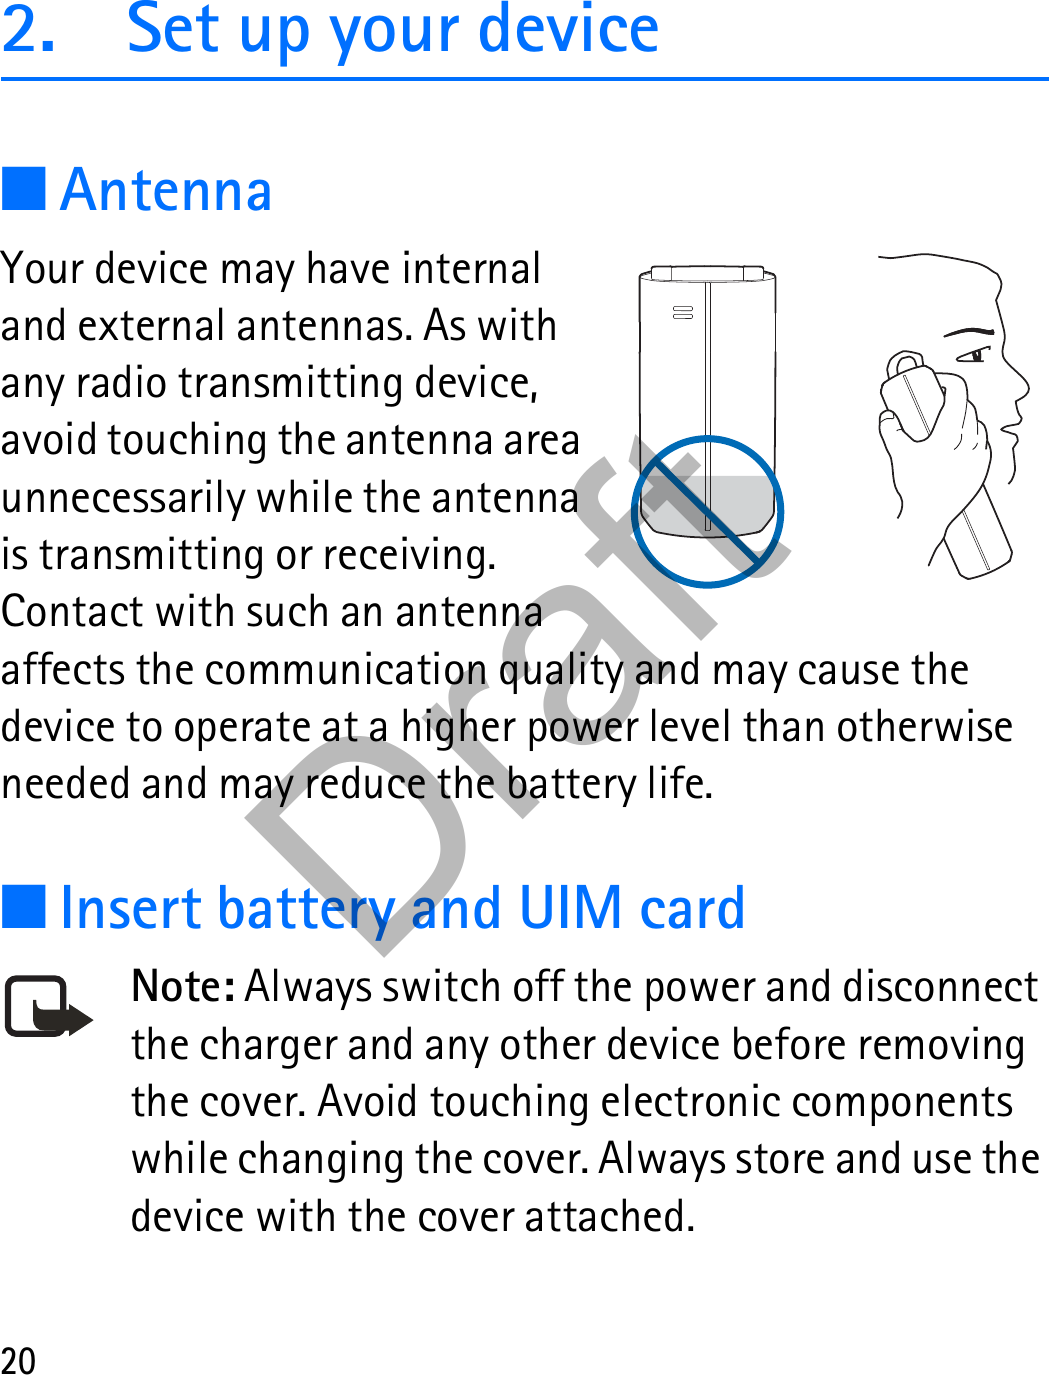 202. Set up your device■AntennaYour device may have internal and external antennas. As with any radio transmitting device, avoid touching the antenna area unnecessarily while the antenna is transmitting or receiving. Contact with such an antenna affects the communication quality and may cause the device to operate at a higher power level than otherwise needed and may reduce the battery life.■Insert battery and UIM cardNote: Always switch off the power and disconnect the charger and any other device before removing the cover. Avoid touching electronic components while changing the cover. Always store and use the device with the cover attached.Draft